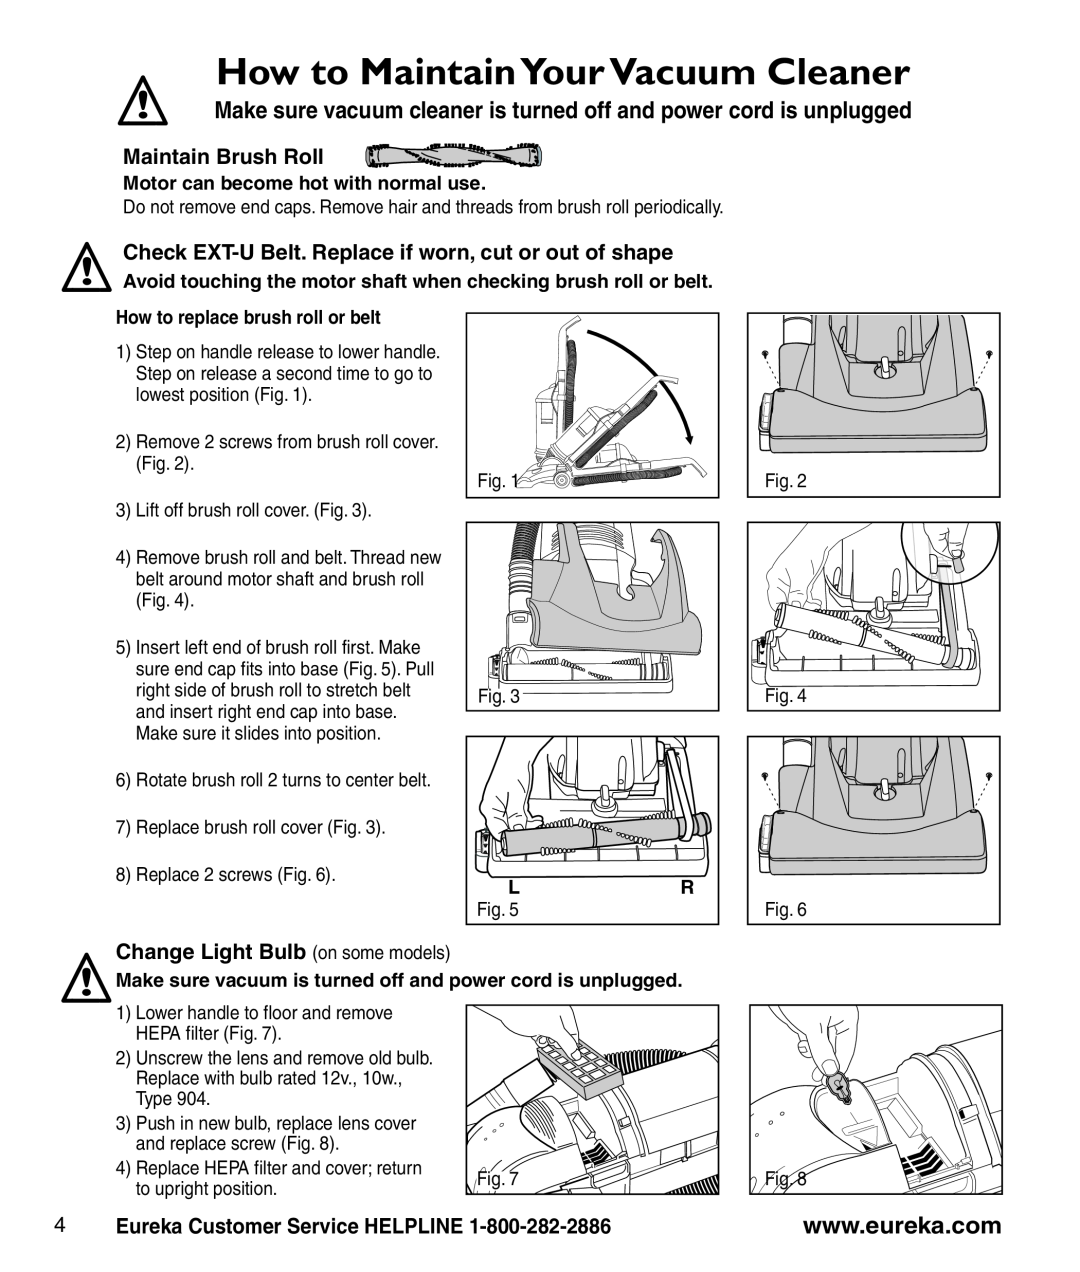 Eureka 3281 manual How to Maintain YourVacuum Cleaner, Make sure vacuum cleaner is turned off and power cord is unplugged 